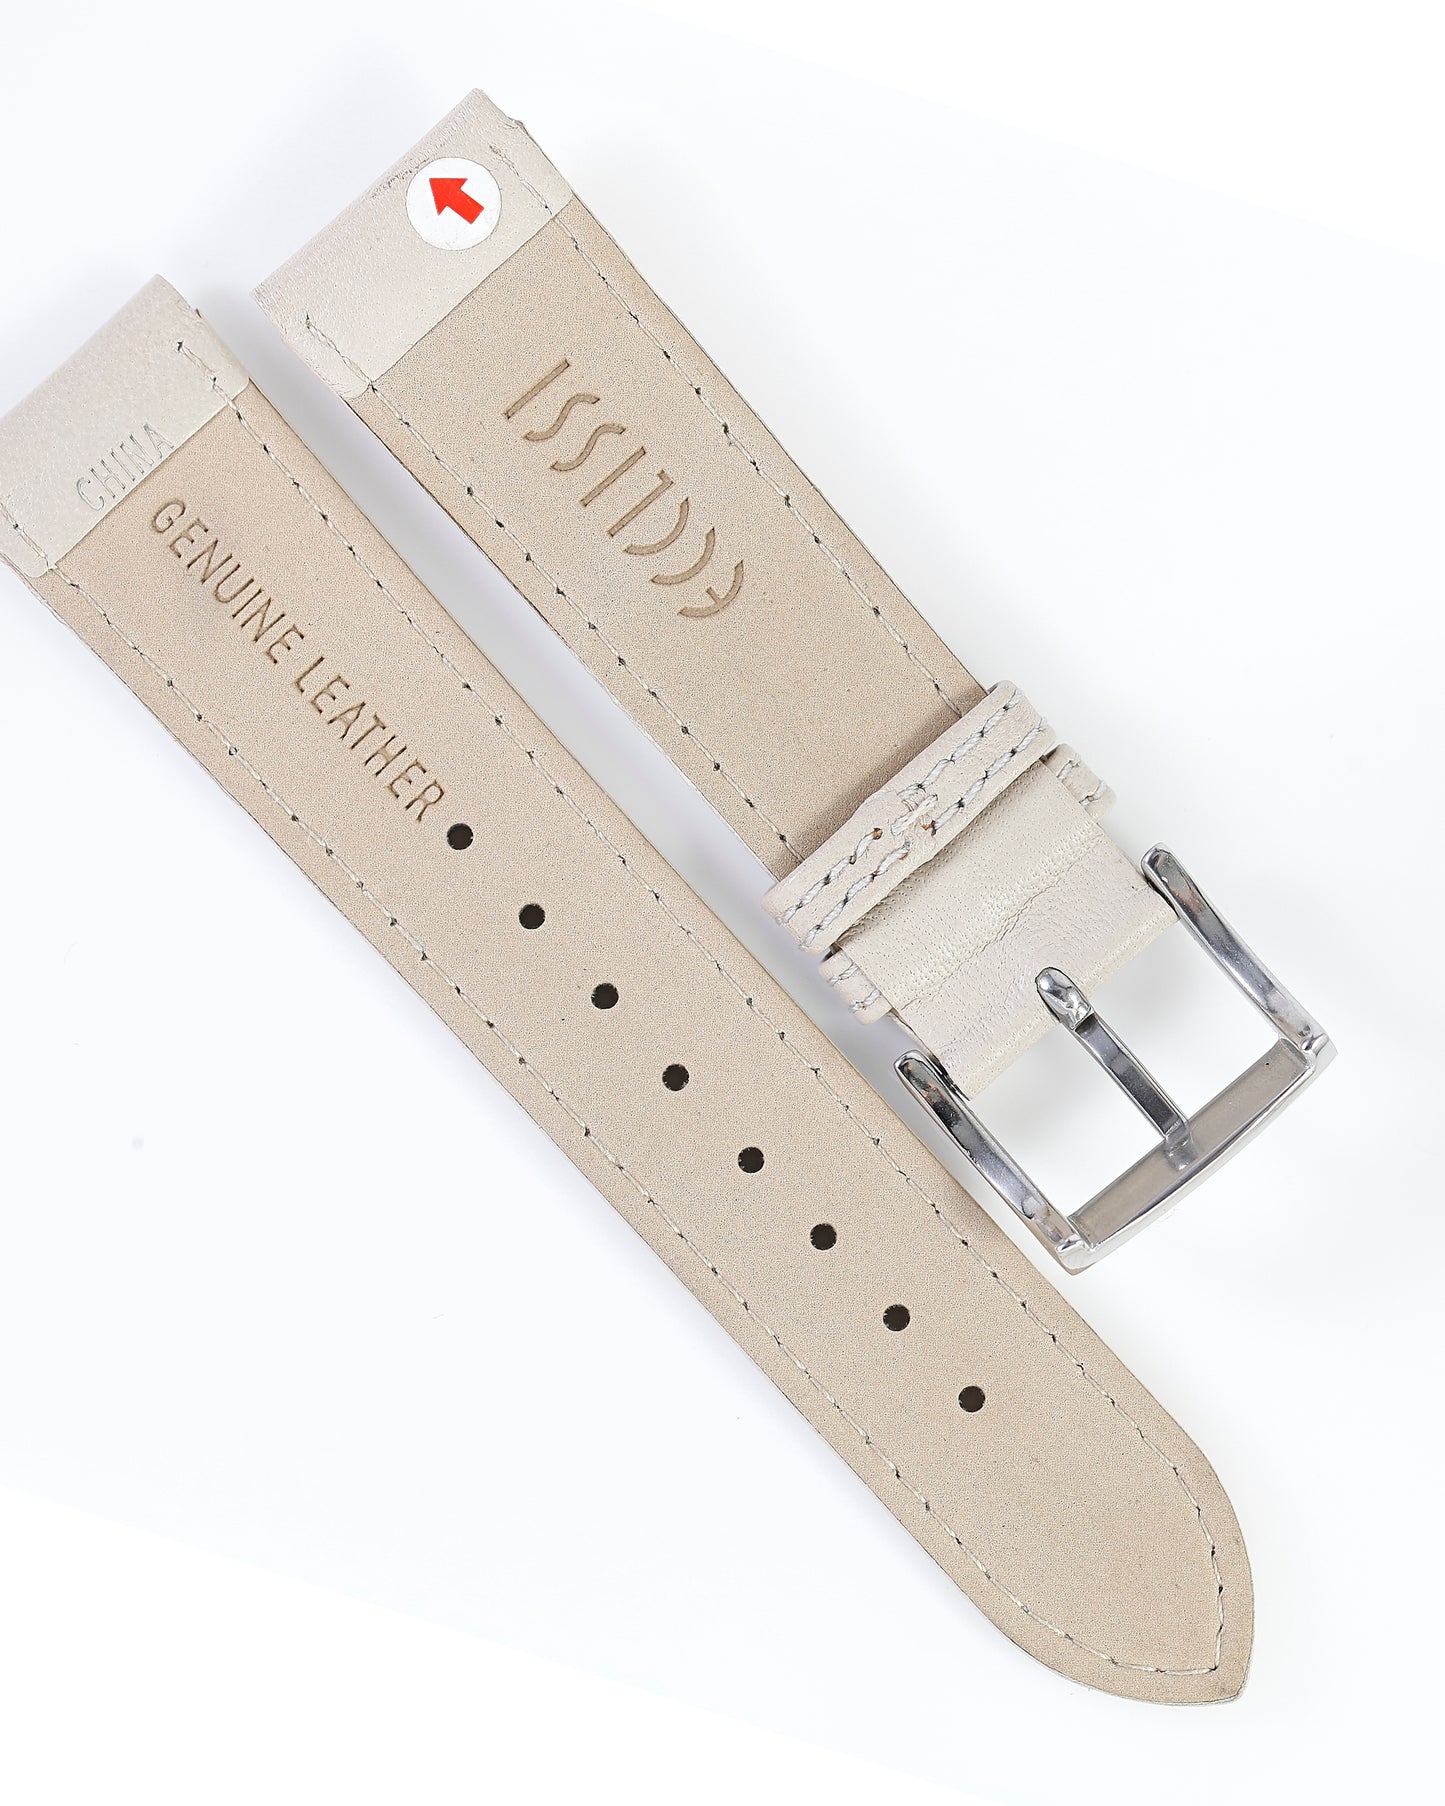 Ecclissi 23155 Off White Leather Strap 20mm x 18mm